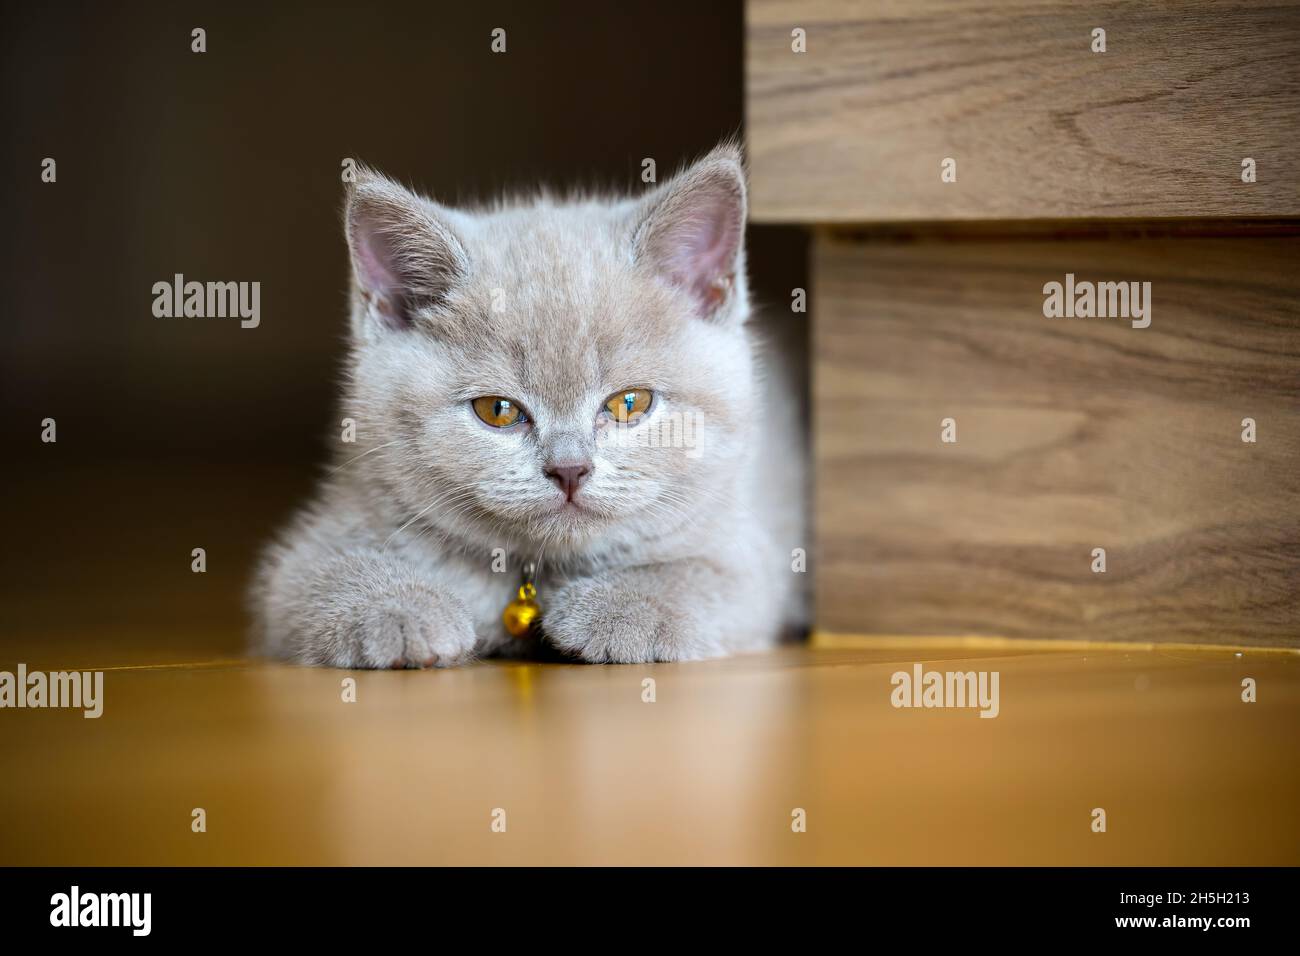 Lilac-colored British Shorthair kitten On the neck there is a golden bell. lying on the wooden floor in the bedroom, full front view, the cat is relax Stock Photo